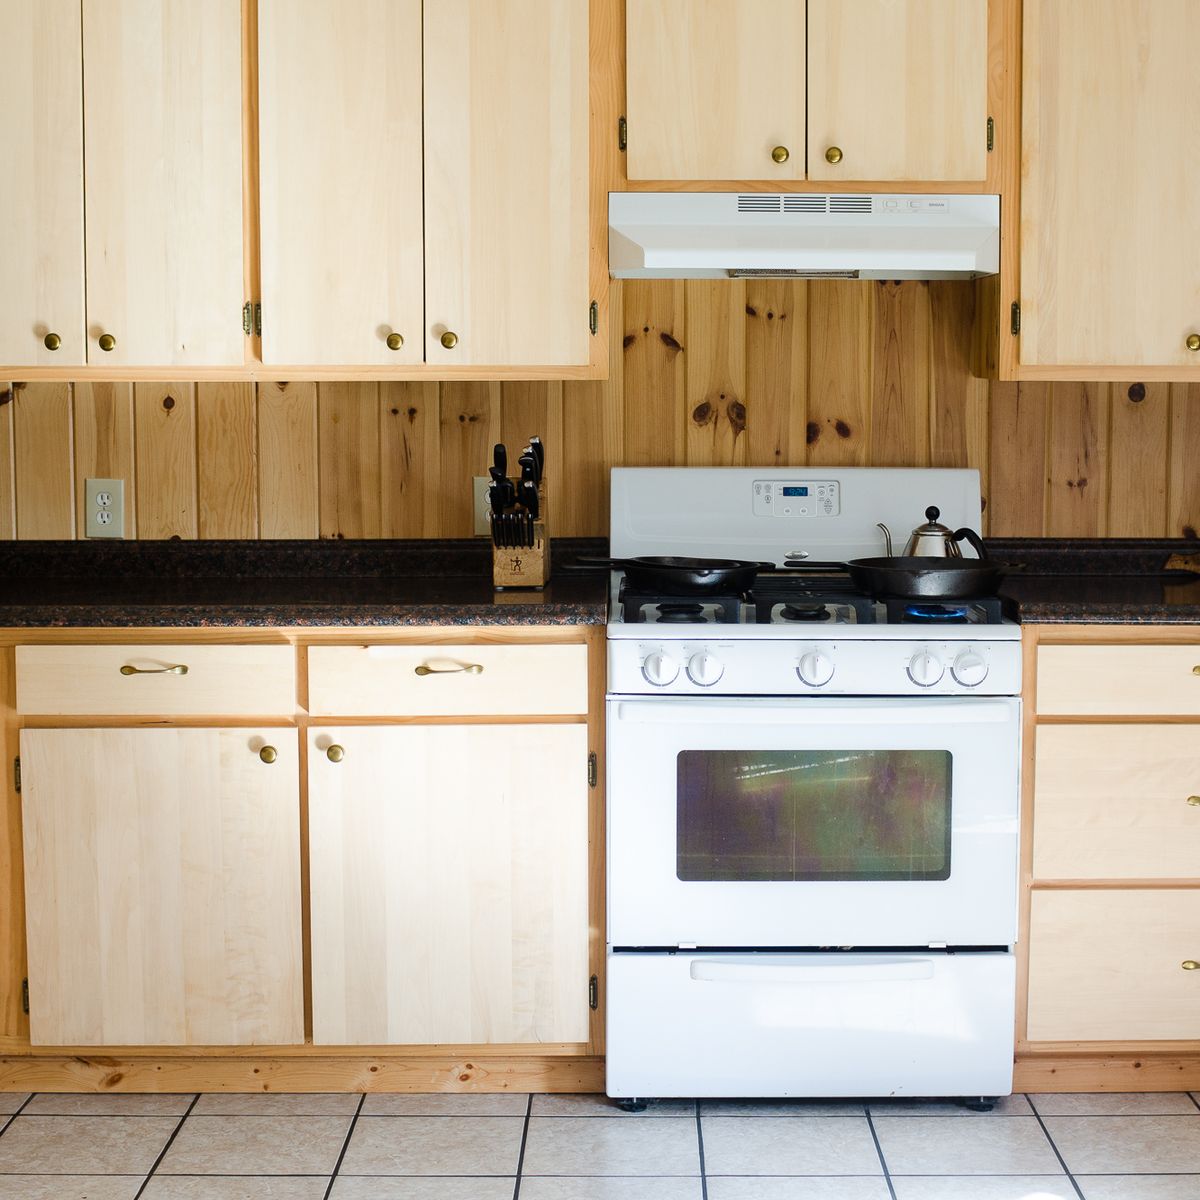 10 Tips for Making Your Dishwasher More Efficient